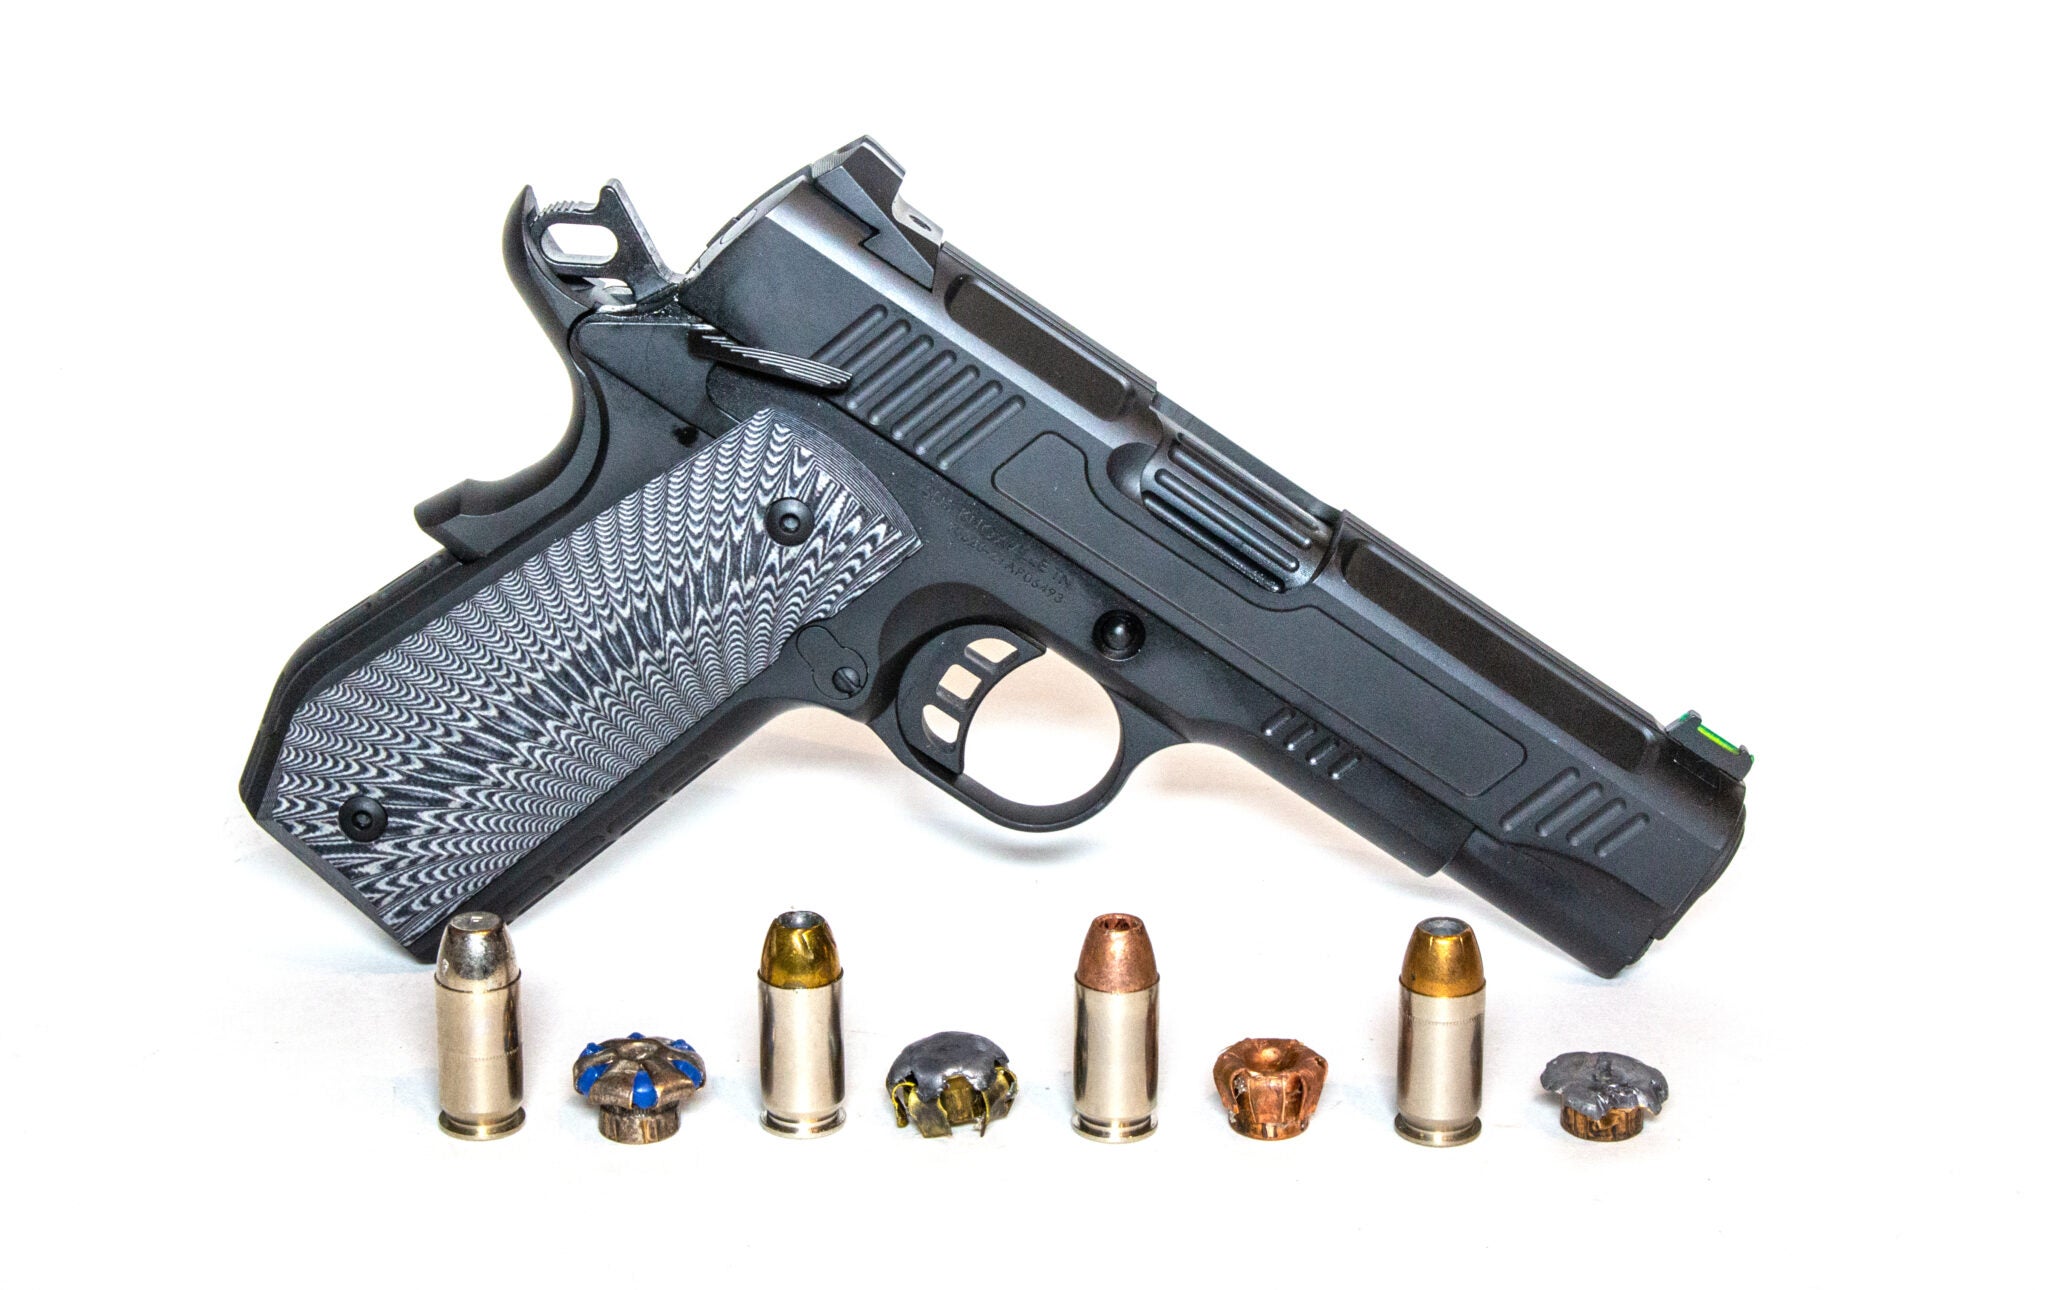 9mm, .45 Auto, or .40 S&W Which Handgun Has the Most Stopping Power